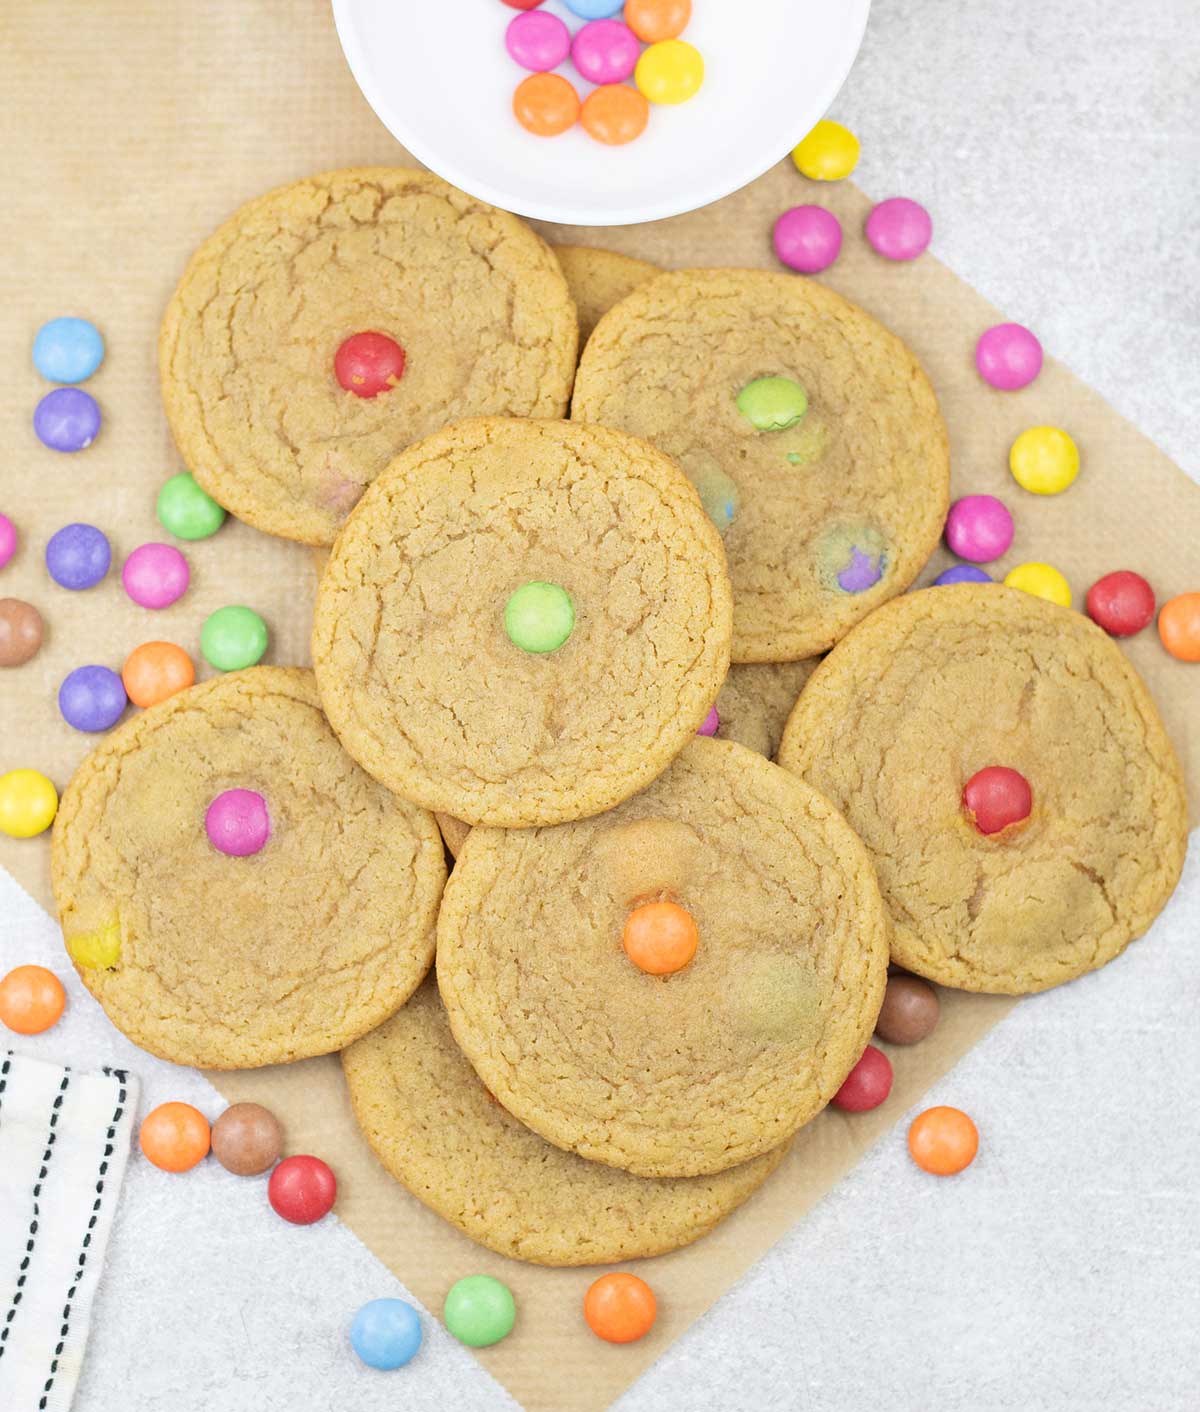 Smarties cookies and some Smarties scattered around.